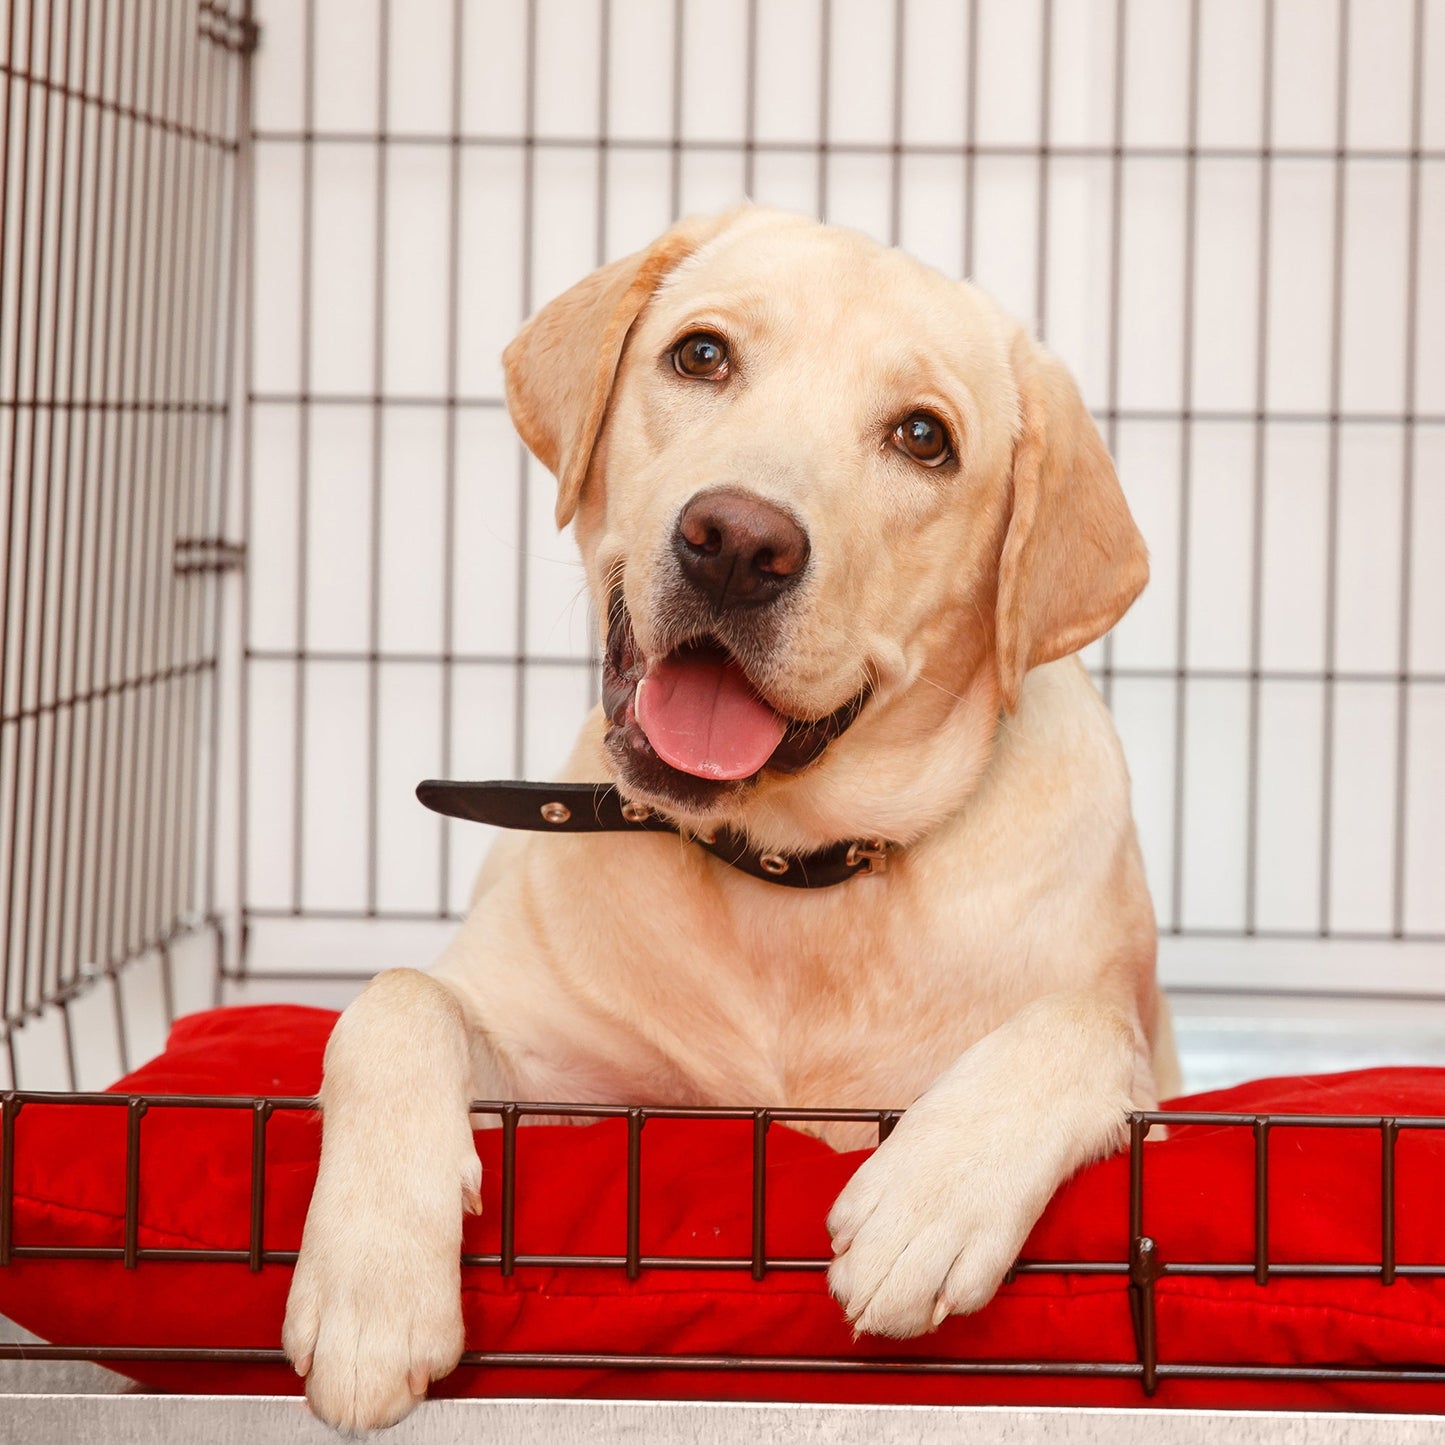 Send Crates to Animals: Provide Comfort & Safety